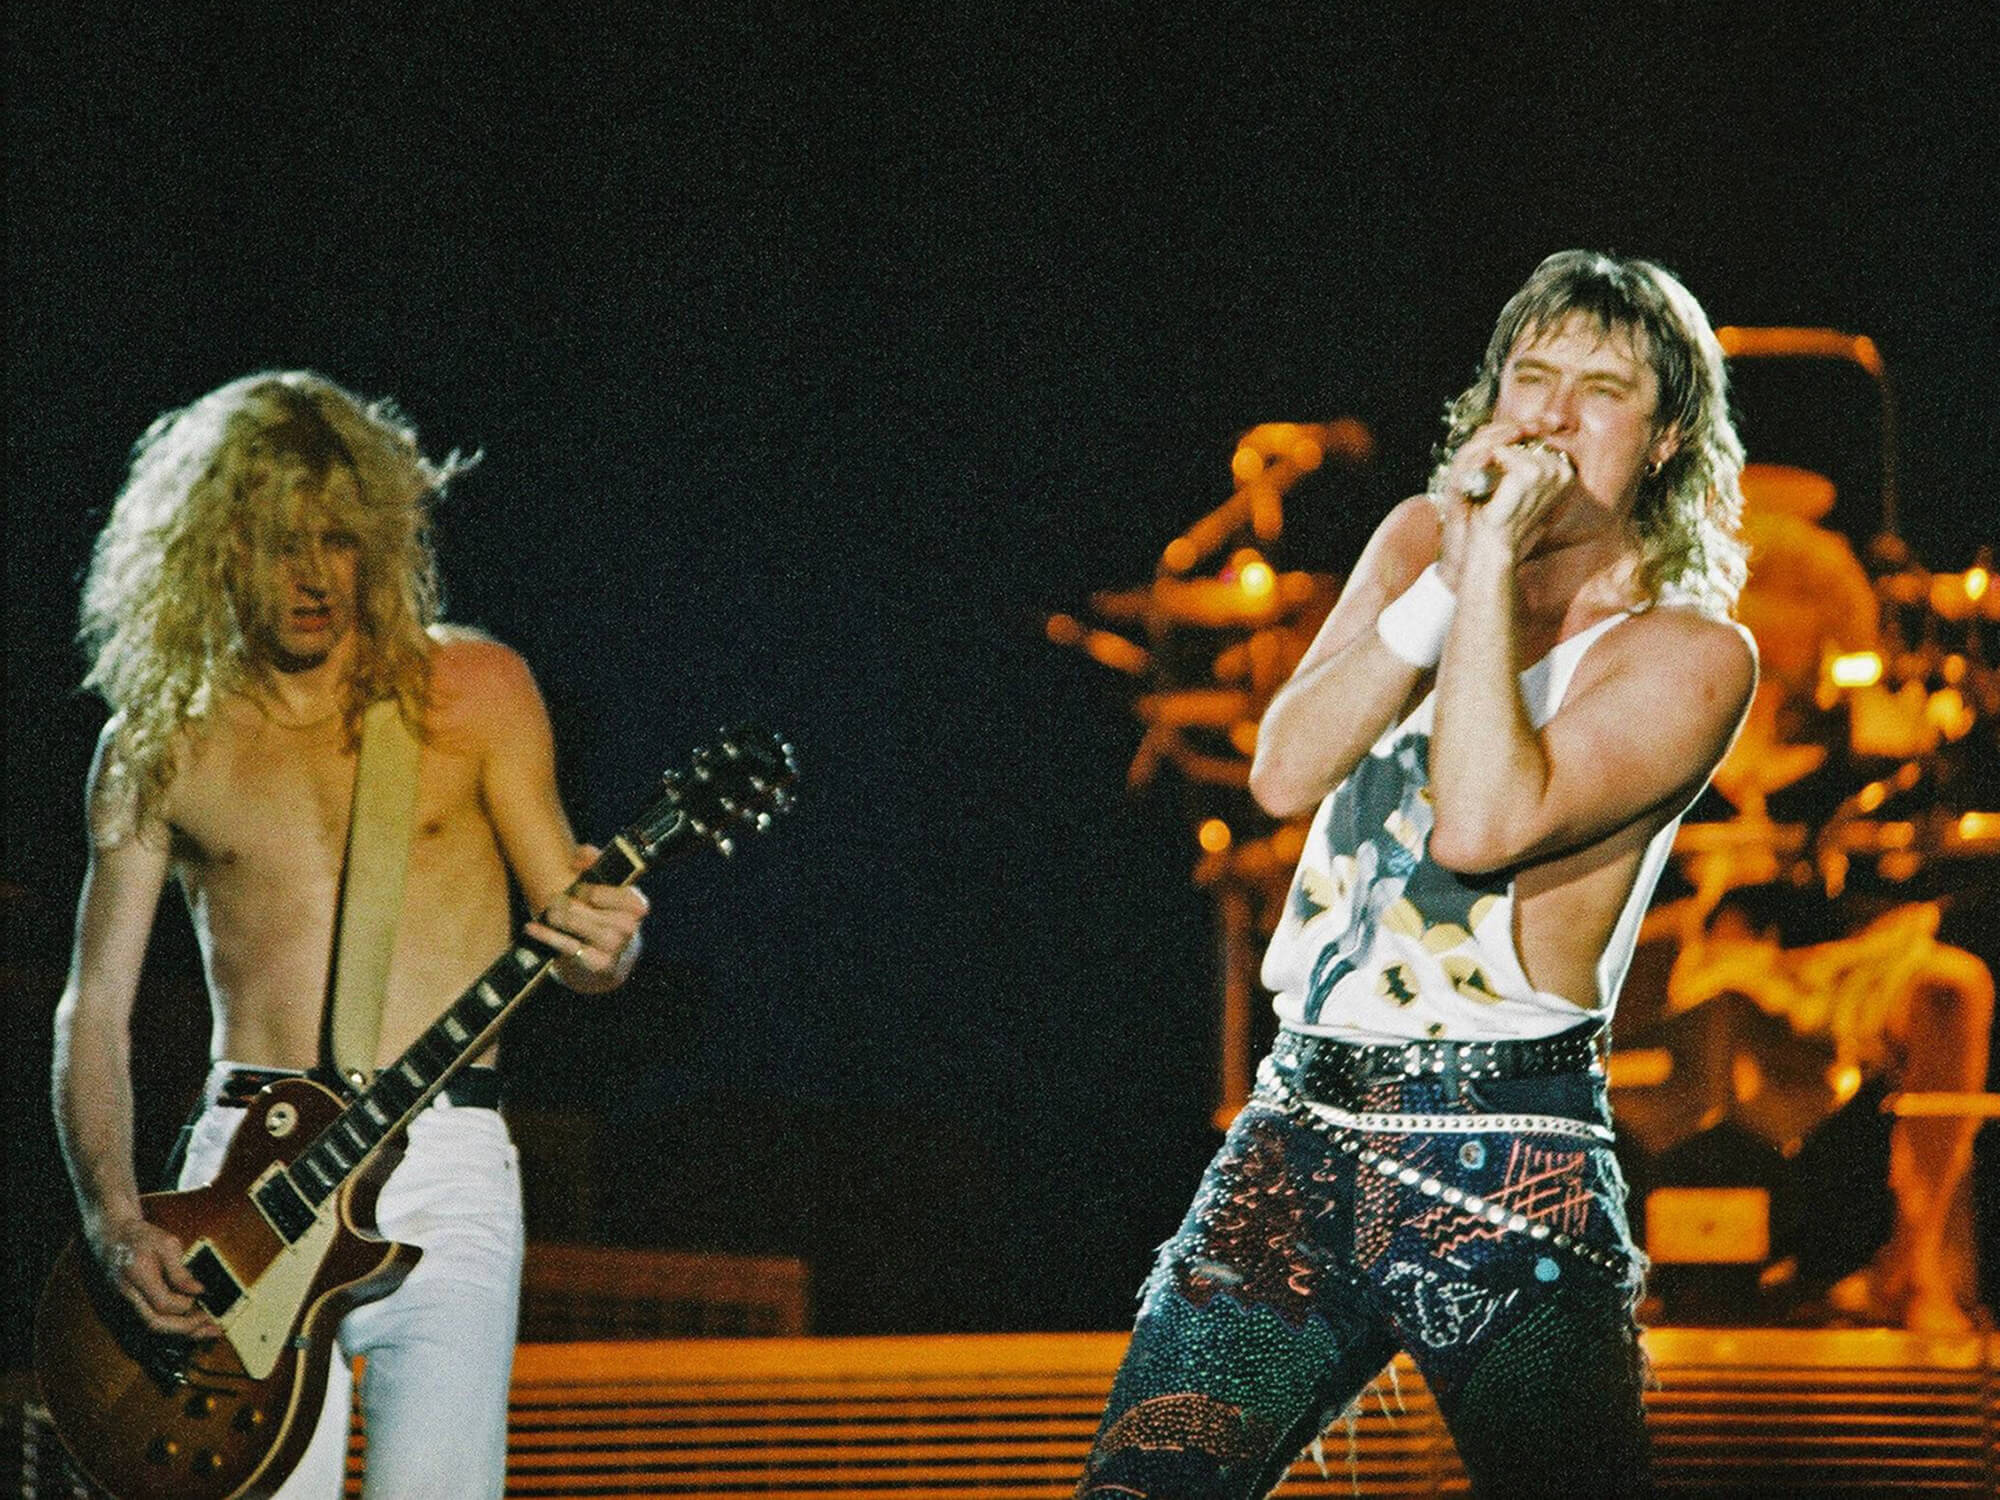 Steve Clark and Joe Elliott of Def Leppard performing during the 1988 ‘Hysteria’ tour, photo by Pete Still/Redferns via Getty Images